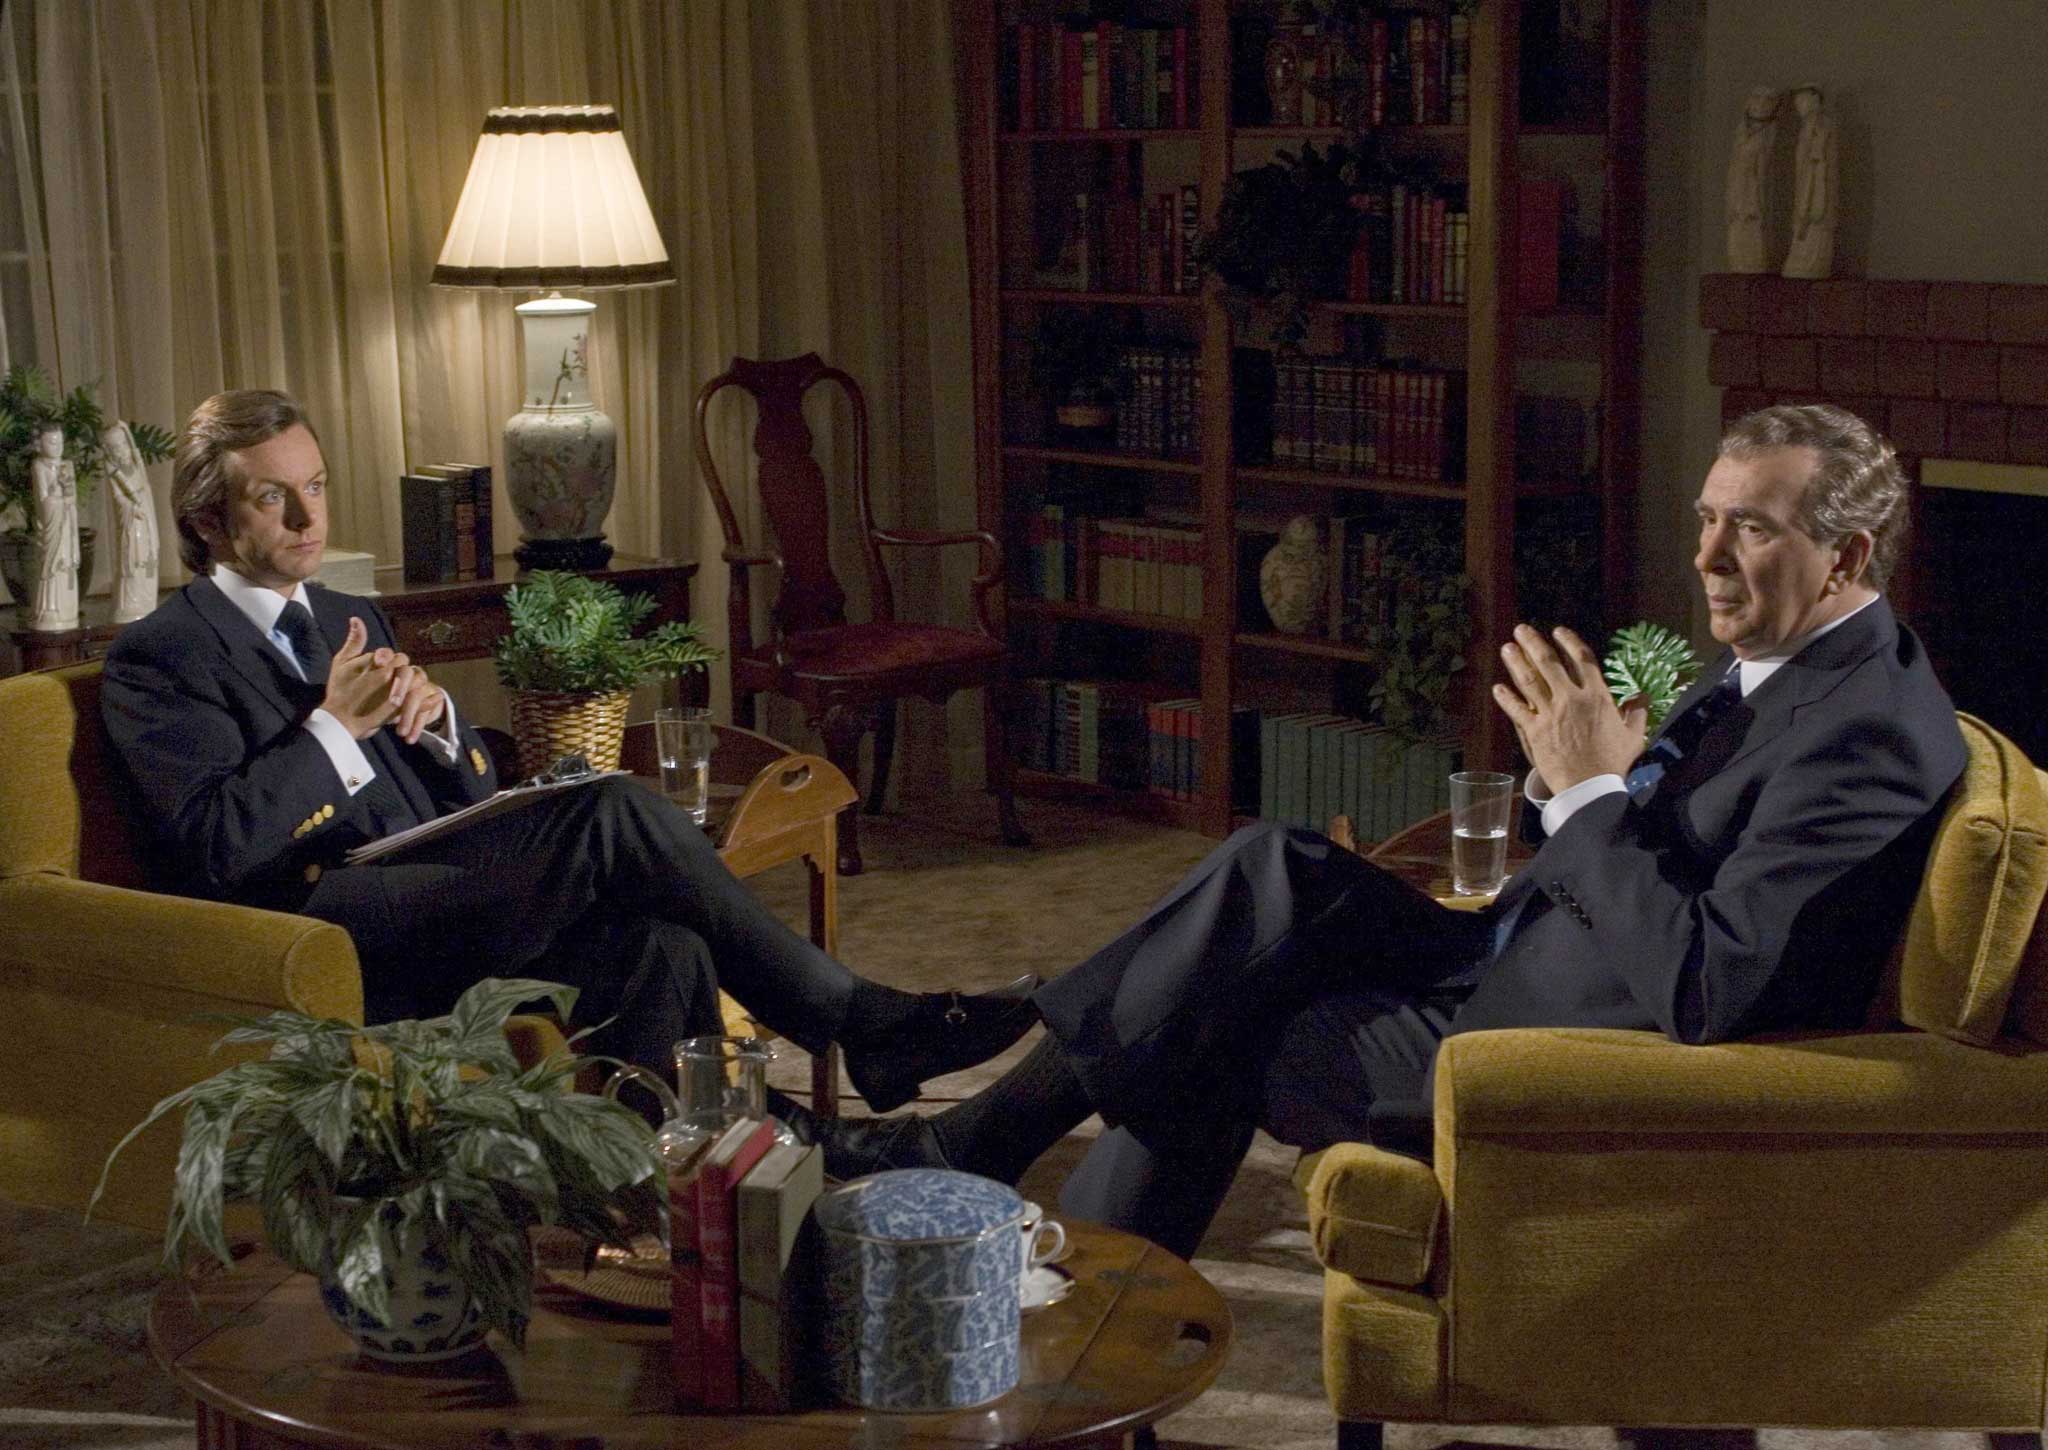 Tight-lipped: Michael Sheen as David Frost and Frank Langella as mRichard Nixon in the film version of Frost/Nixon